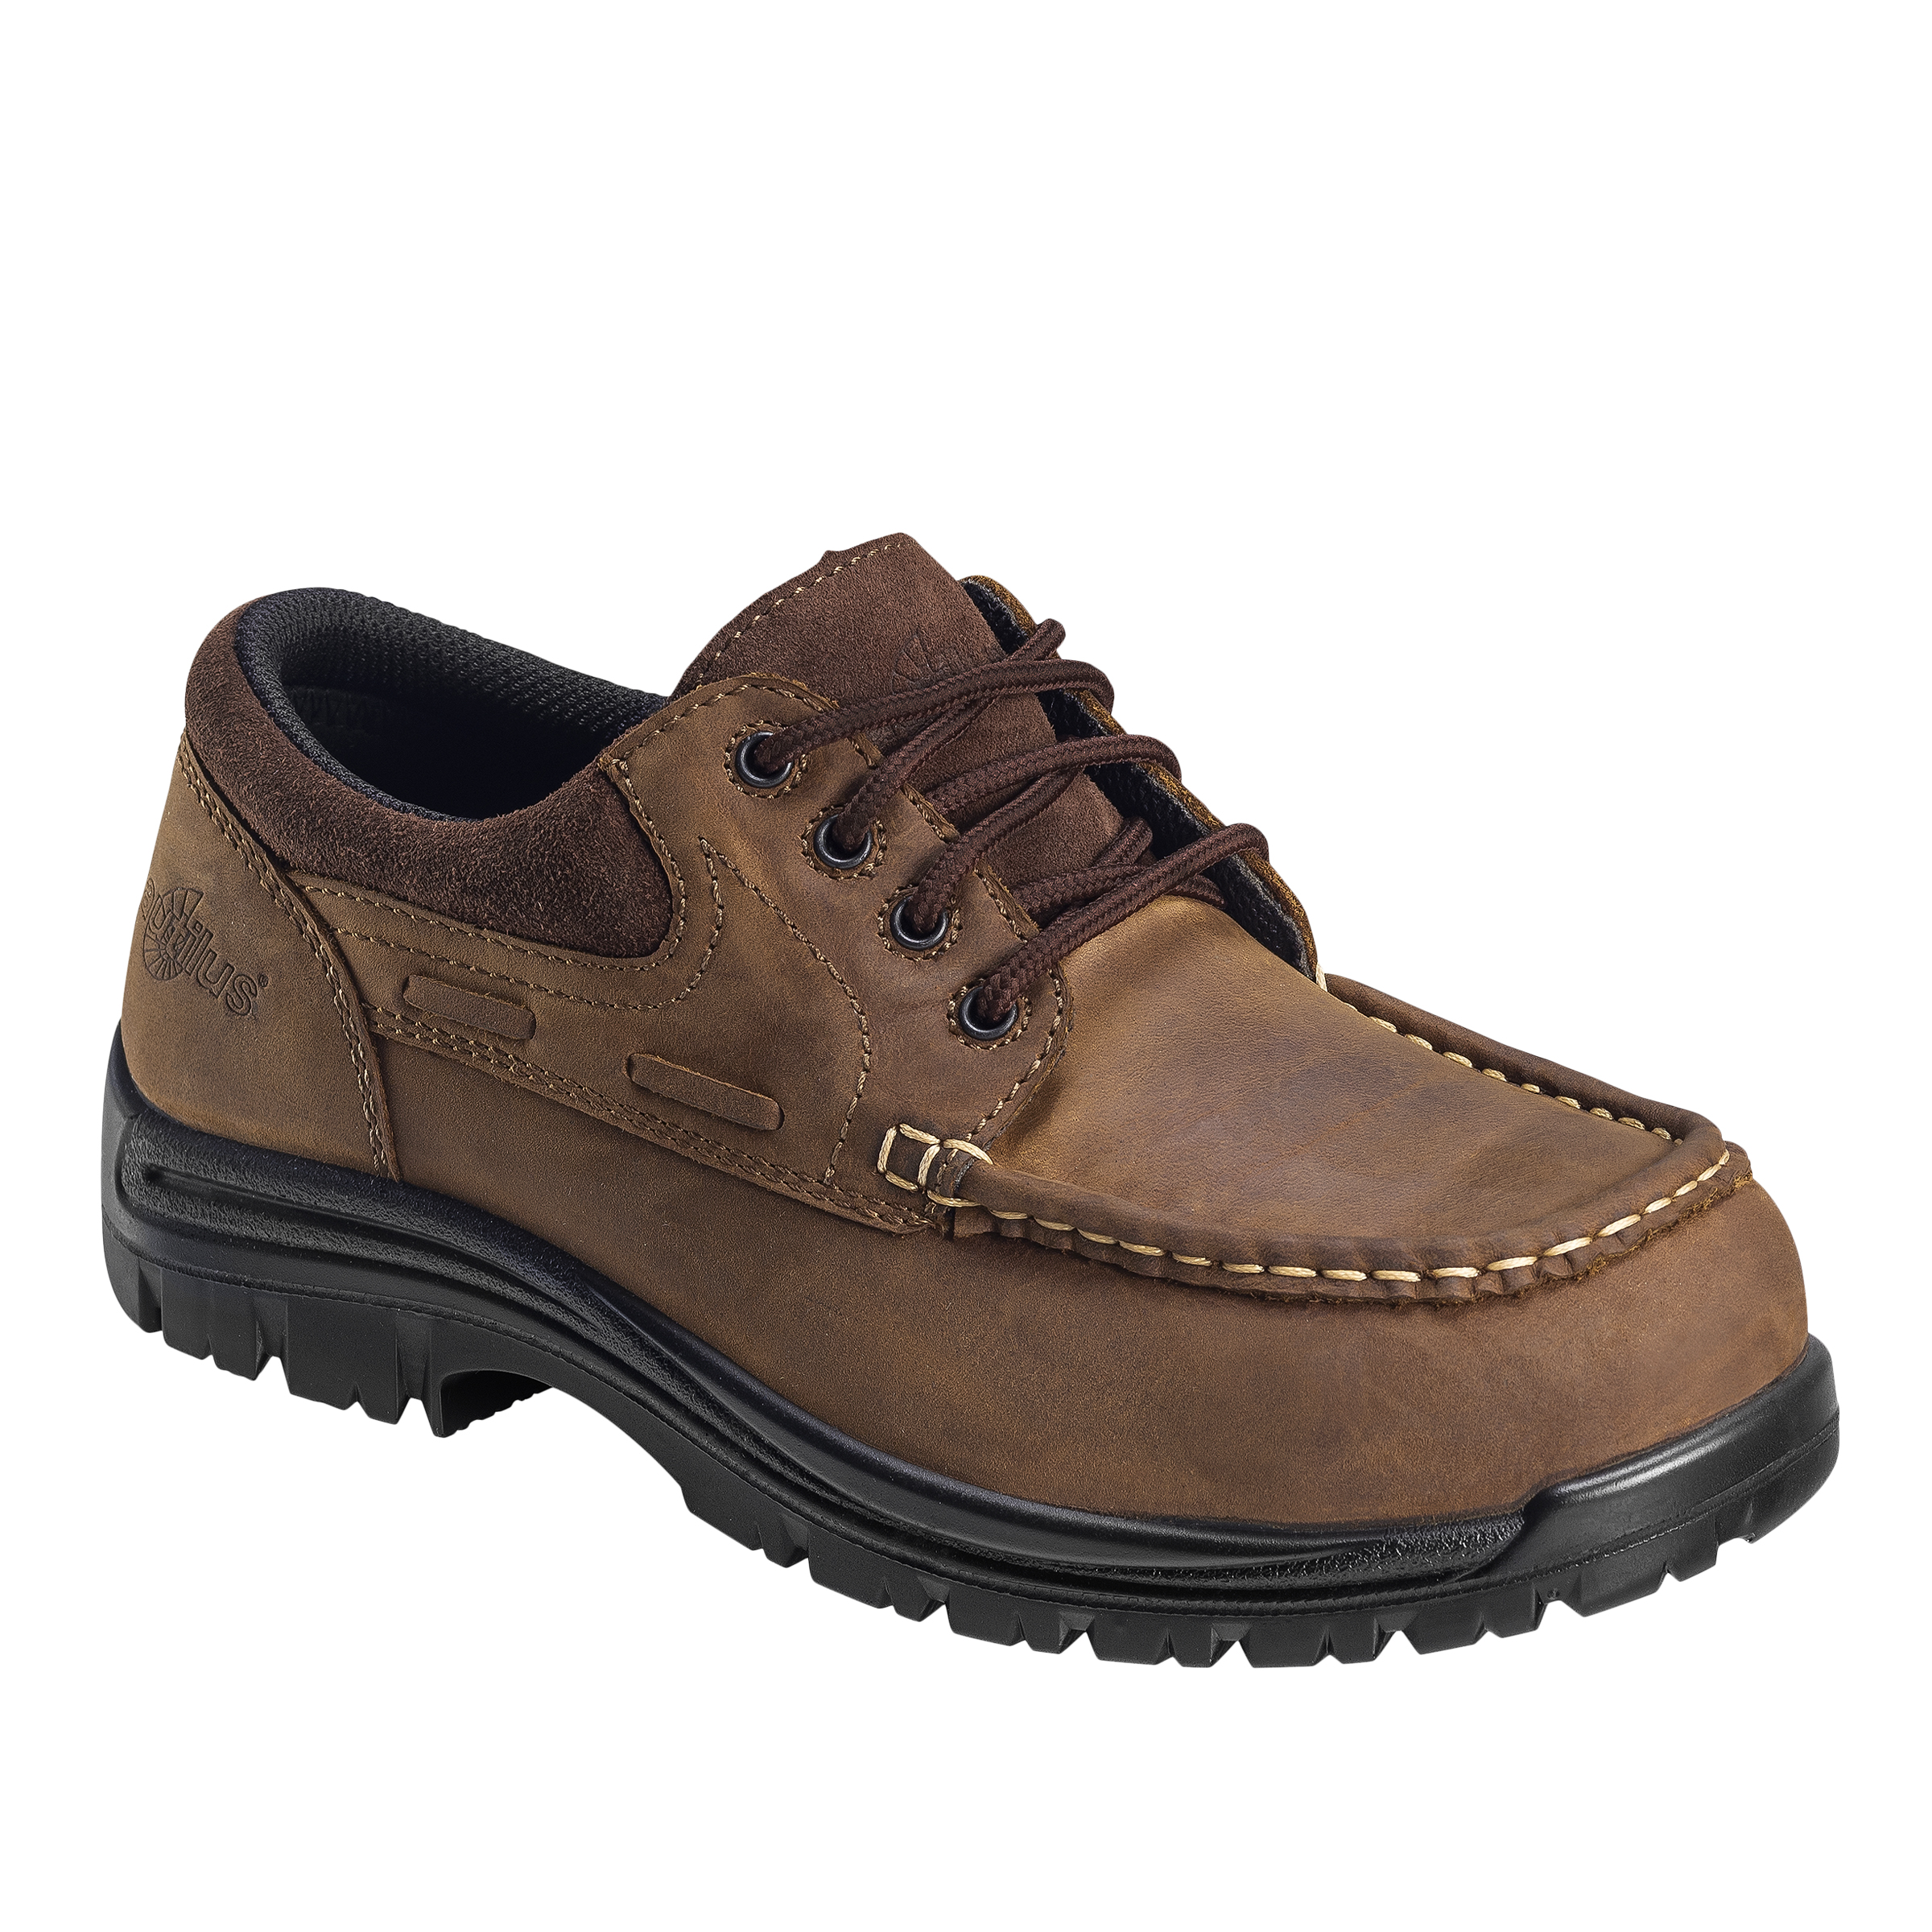 Nautilus Safety Footwear Men's N1826 Composite Toe EH Leather Work Shoe Wide Width Available - Brown